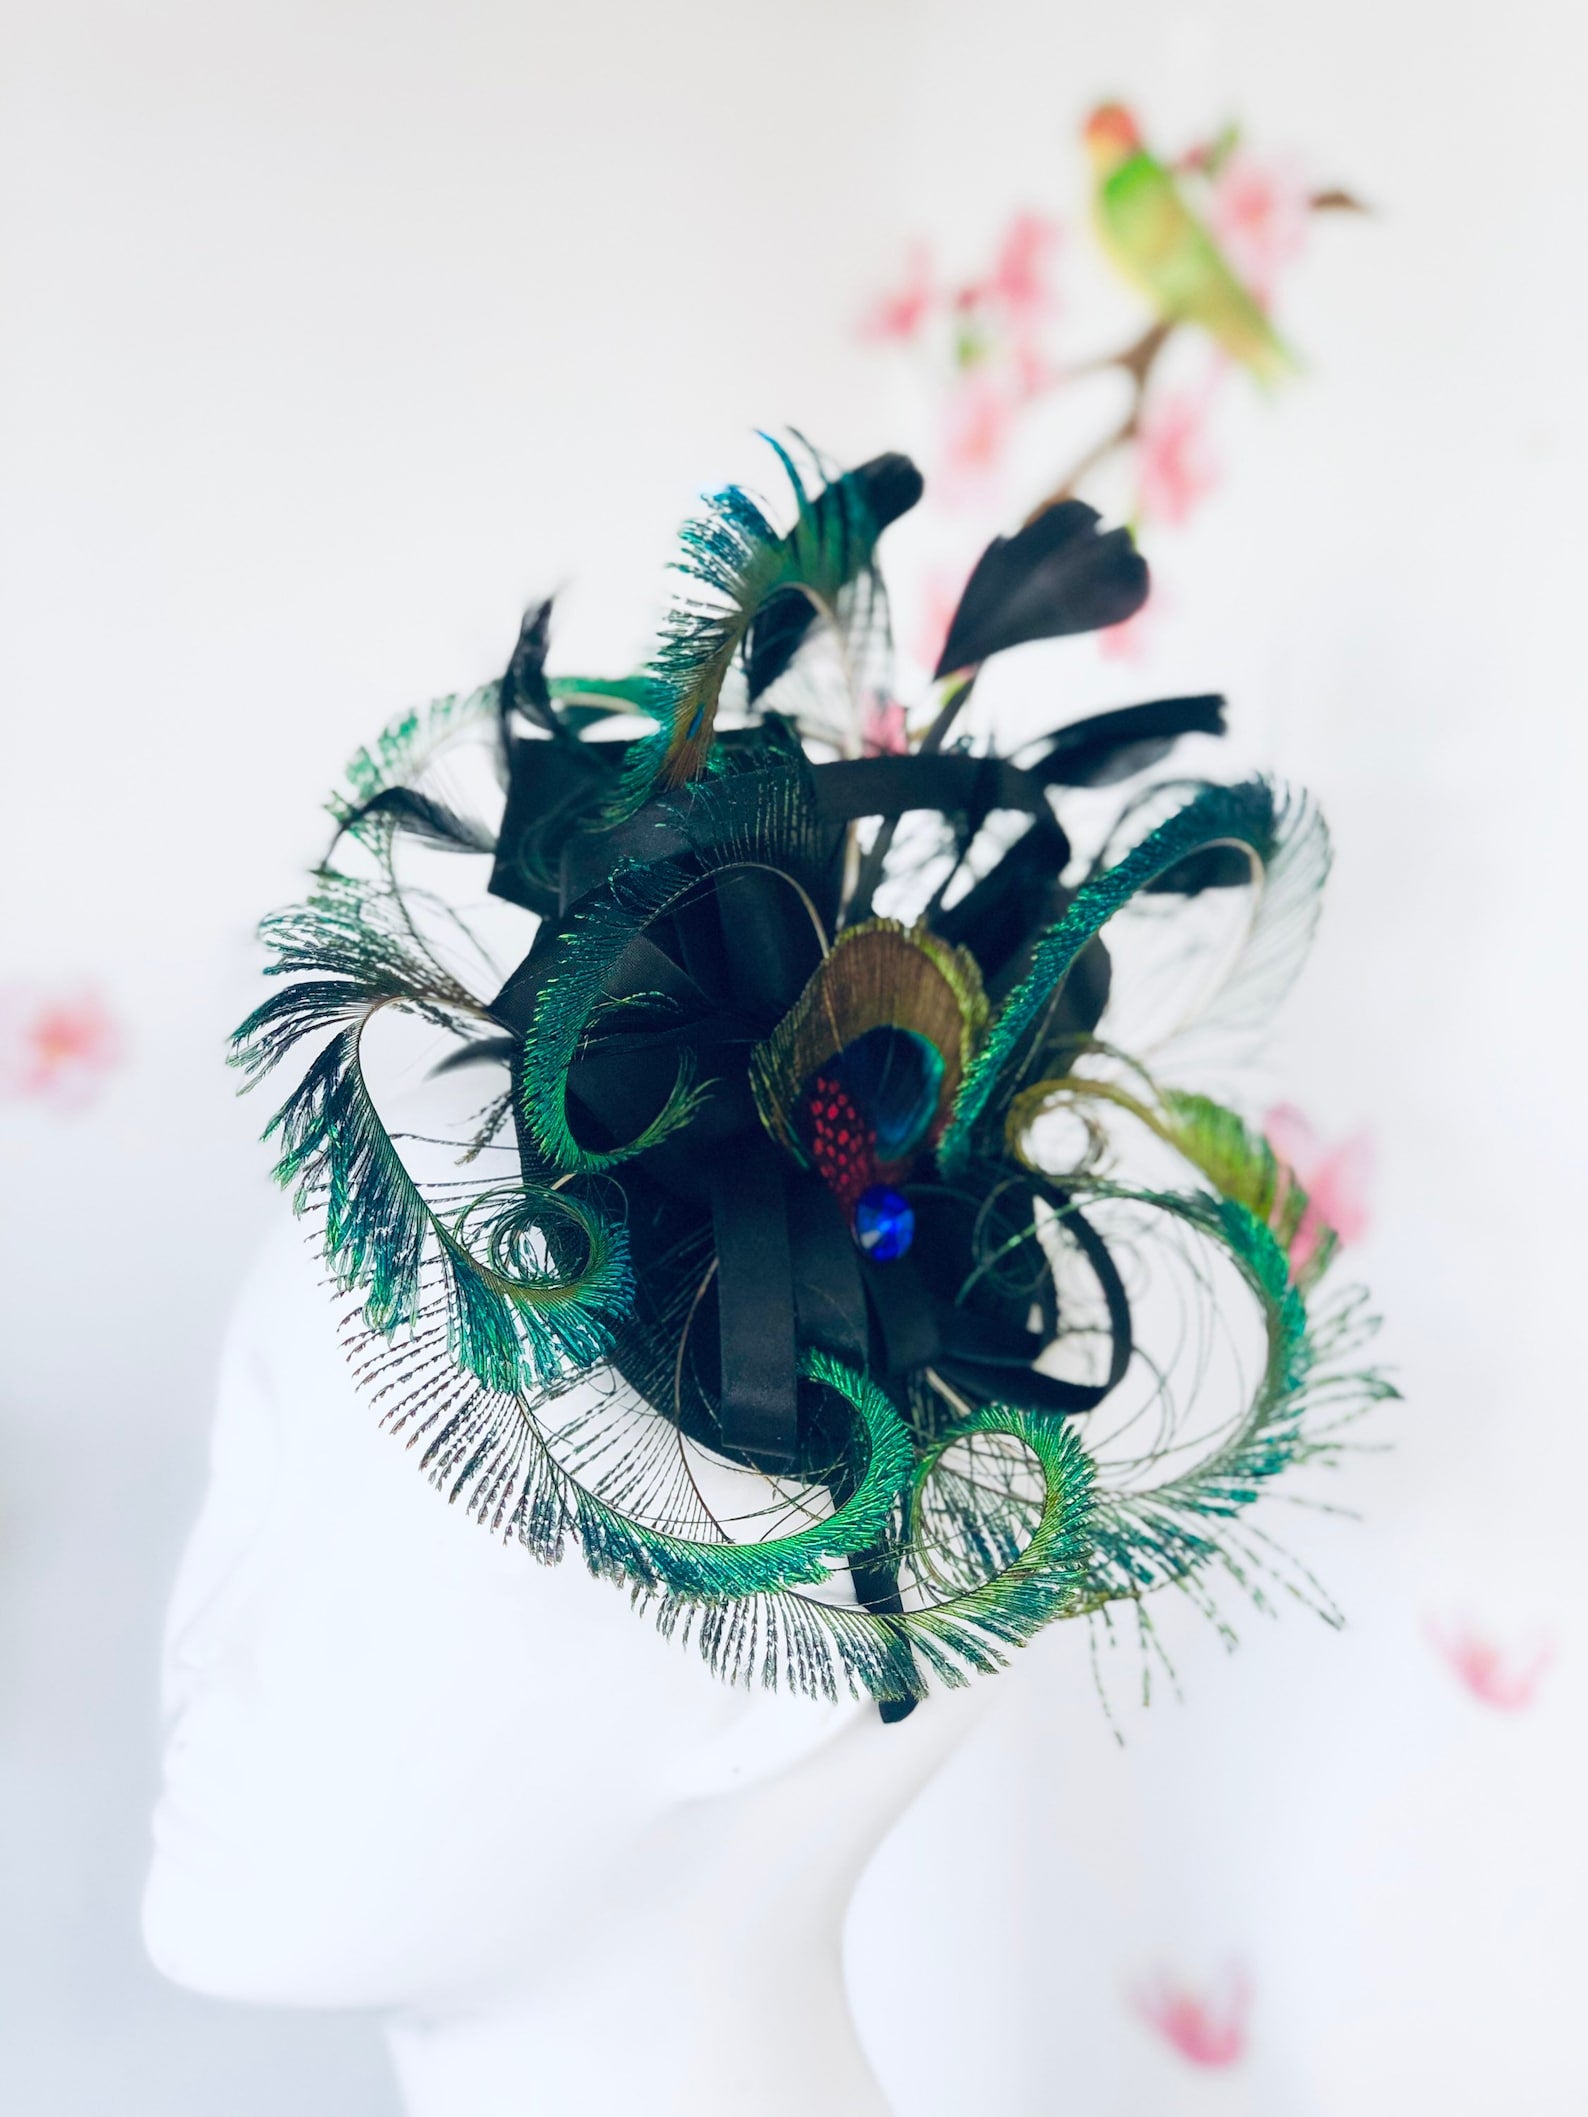 Black fascinator hat with peacock feathers.